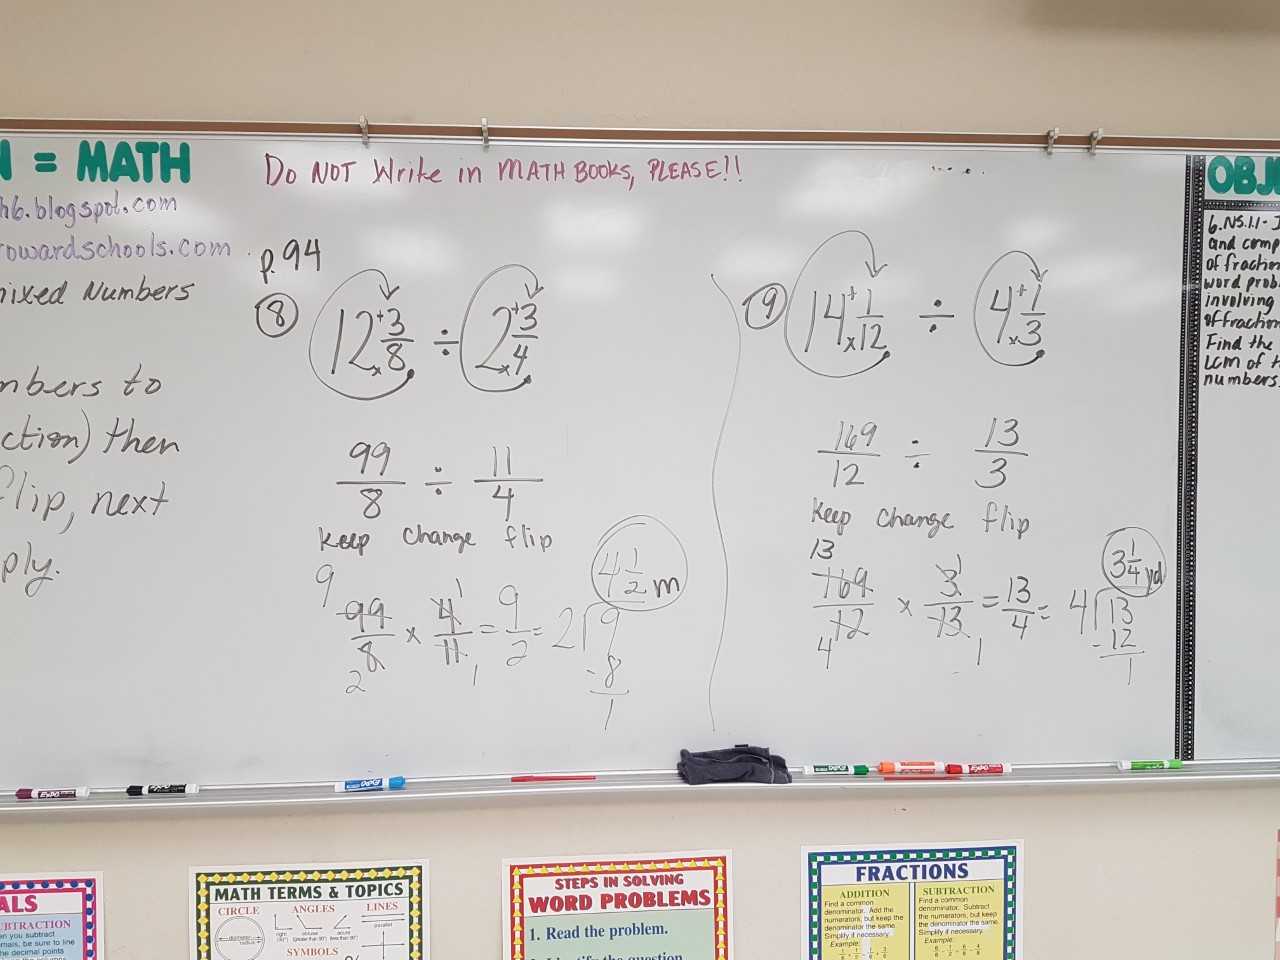 mrs-negron-6th-grade-math-class-lesson-4-3-dividing-mixed-numbers